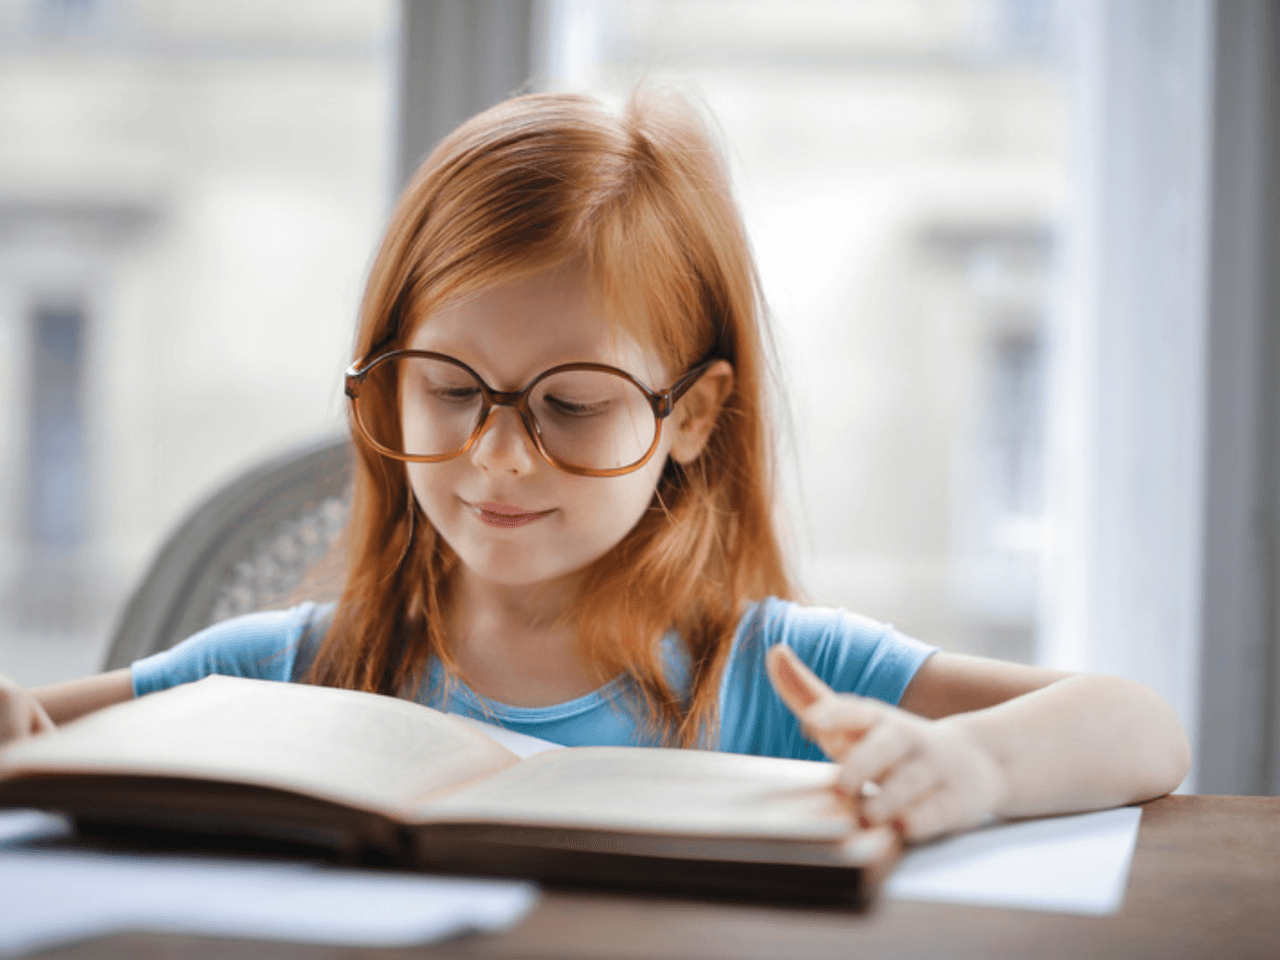 Child wearing glasses and smiling while reading a book at her desk.